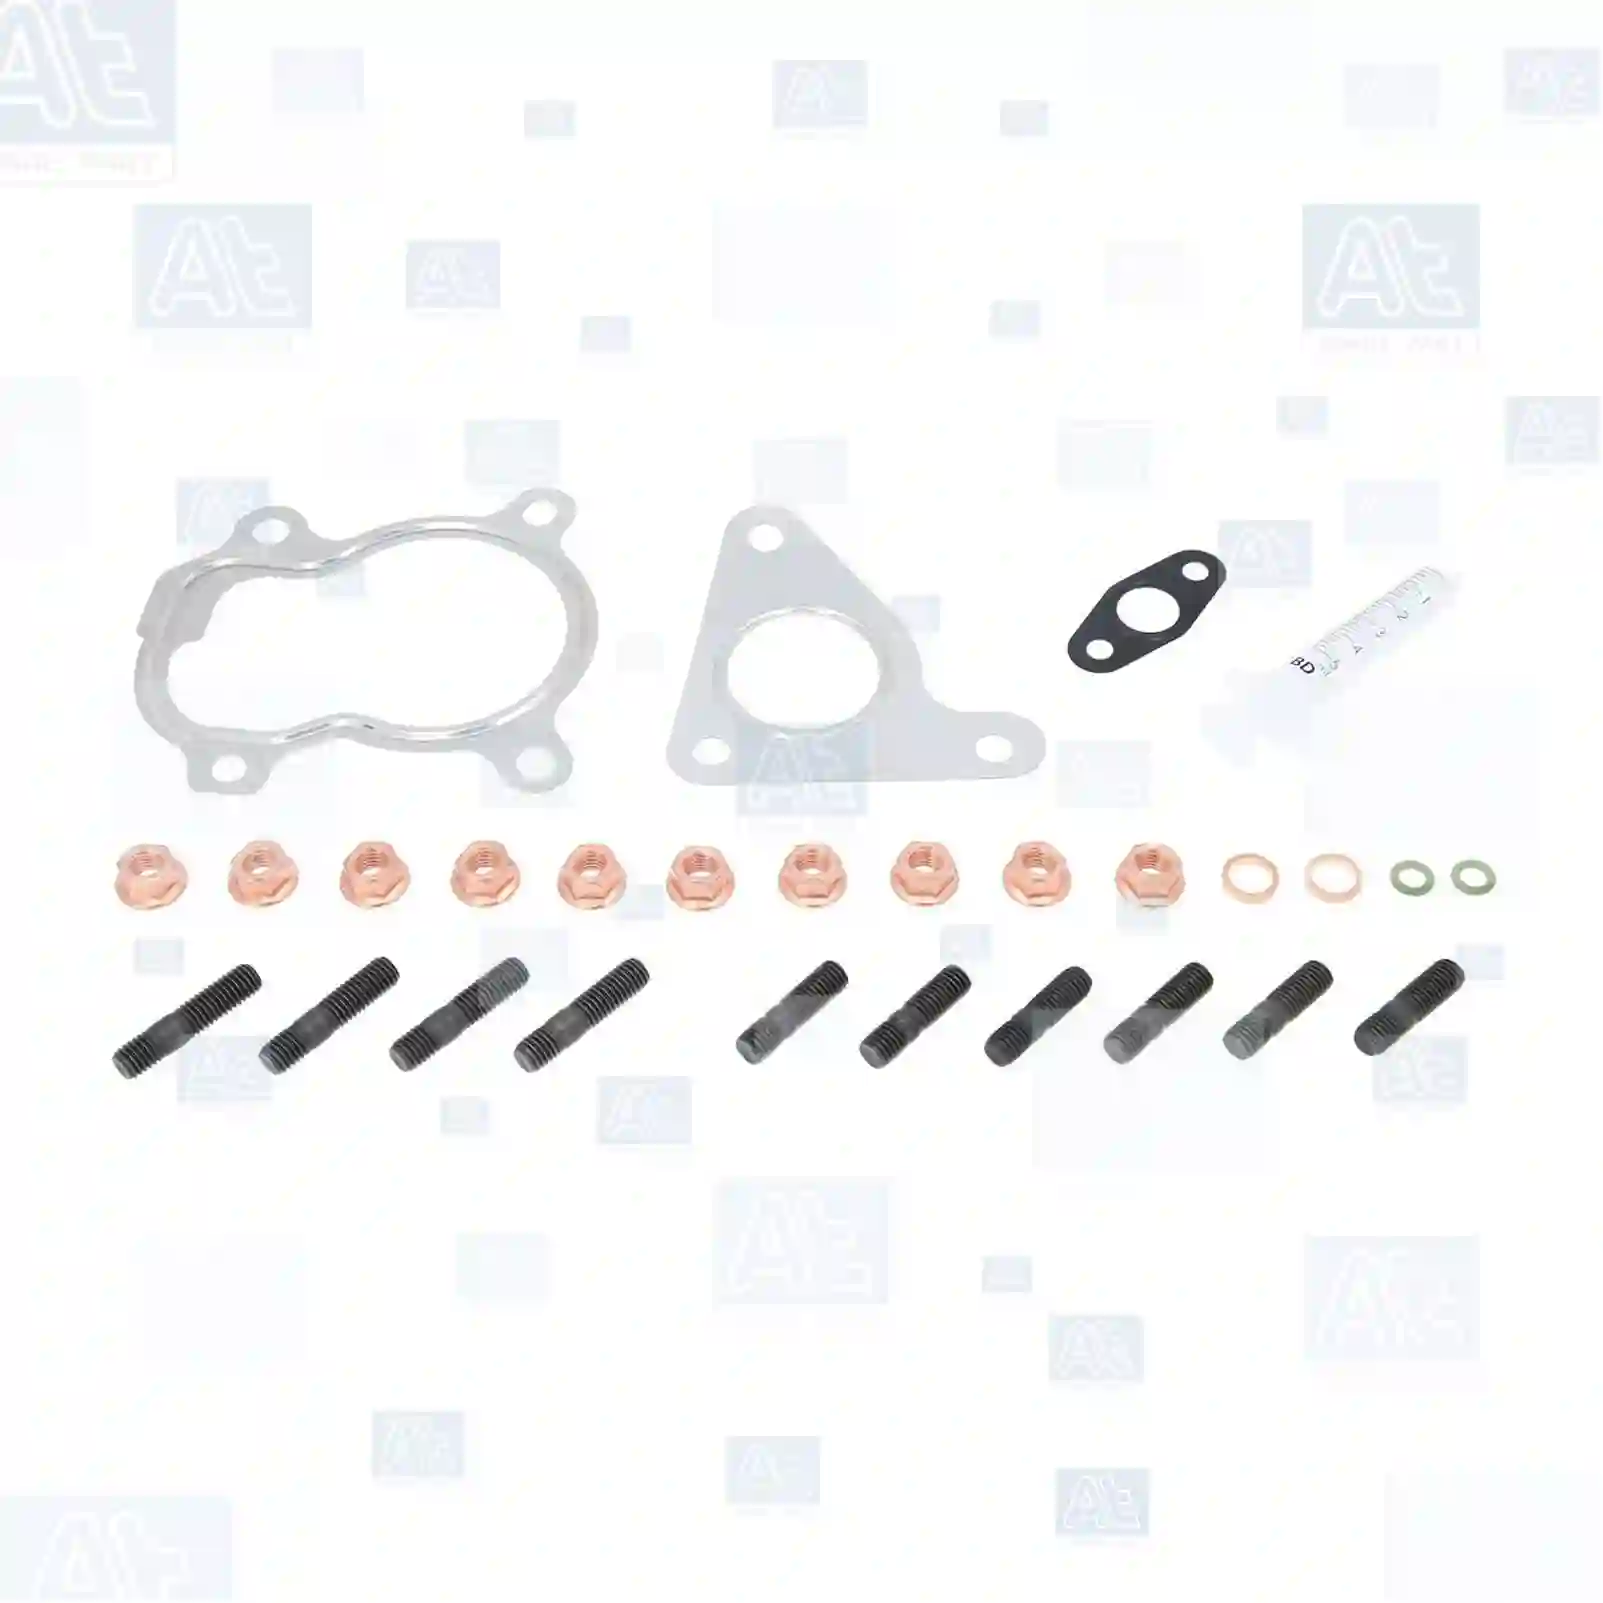 Gasket kit, turbocharger, 77703637, 9121244S, 93160135S, 93184486S, 93184488S, 93187292S, 93198156S, 93198157S, 14411-00Q0AS, 14411-00QAAS, 4405411S, 4409975S, 4416393S, 4433761S, 4433764S, 5860004S, 5860005S, 7700108052S, 7701472228S, 7701476298S, 7701478026S, 7711134299S, 7711134774S, 7711497142S, 8200046681S, 8200091350S, 8200348242S, 8200348244S, 8200458160S, 8200458162S, 8200544907S, 8200544911S, 8200683853S, 8200683854S ||  77703637 At Spare Part | Engine, Accelerator Pedal, Camshaft, Connecting Rod, Crankcase, Crankshaft, Cylinder Head, Engine Suspension Mountings, Exhaust Manifold, Exhaust Gas Recirculation, Filter Kits, Flywheel Housing, General Overhaul Kits, Engine, Intake Manifold, Oil Cleaner, Oil Cooler, Oil Filter, Oil Pump, Oil Sump, Piston & Liner, Sensor & Switch, Timing Case, Turbocharger, Cooling System, Belt Tensioner, Coolant Filter, Coolant Pipe, Corrosion Prevention Agent, Drive, Expansion Tank, Fan, Intercooler, Monitors & Gauges, Radiator, Thermostat, V-Belt / Timing belt, Water Pump, Fuel System, Electronical Injector Unit, Feed Pump, Fuel Filter, cpl., Fuel Gauge Sender,  Fuel Line, Fuel Pump, Fuel Tank, Injection Line Kit, Injection Pump, Exhaust System, Clutch & Pedal, Gearbox, Propeller Shaft, Axles, Brake System, Hubs & Wheels, Suspension, Leaf Spring, Universal Parts / Accessories, Steering, Electrical System, Cabin Gasket kit, turbocharger, 77703637, 9121244S, 93160135S, 93184486S, 93184488S, 93187292S, 93198156S, 93198157S, 14411-00Q0AS, 14411-00QAAS, 4405411S, 4409975S, 4416393S, 4433761S, 4433764S, 5860004S, 5860005S, 7700108052S, 7701472228S, 7701476298S, 7701478026S, 7711134299S, 7711134774S, 7711497142S, 8200046681S, 8200091350S, 8200348242S, 8200348244S, 8200458160S, 8200458162S, 8200544907S, 8200544911S, 8200683853S, 8200683854S ||  77703637 At Spare Part | Engine, Accelerator Pedal, Camshaft, Connecting Rod, Crankcase, Crankshaft, Cylinder Head, Engine Suspension Mountings, Exhaust Manifold, Exhaust Gas Recirculation, Filter Kits, Flywheel Housing, General Overhaul Kits, Engine, Intake Manifold, Oil Cleaner, Oil Cooler, Oil Filter, Oil Pump, Oil Sump, Piston & Liner, Sensor & Switch, Timing Case, Turbocharger, Cooling System, Belt Tensioner, Coolant Filter, Coolant Pipe, Corrosion Prevention Agent, Drive, Expansion Tank, Fan, Intercooler, Monitors & Gauges, Radiator, Thermostat, V-Belt / Timing belt, Water Pump, Fuel System, Electronical Injector Unit, Feed Pump, Fuel Filter, cpl., Fuel Gauge Sender,  Fuel Line, Fuel Pump, Fuel Tank, Injection Line Kit, Injection Pump, Exhaust System, Clutch & Pedal, Gearbox, Propeller Shaft, Axles, Brake System, Hubs & Wheels, Suspension, Leaf Spring, Universal Parts / Accessories, Steering, Electrical System, Cabin